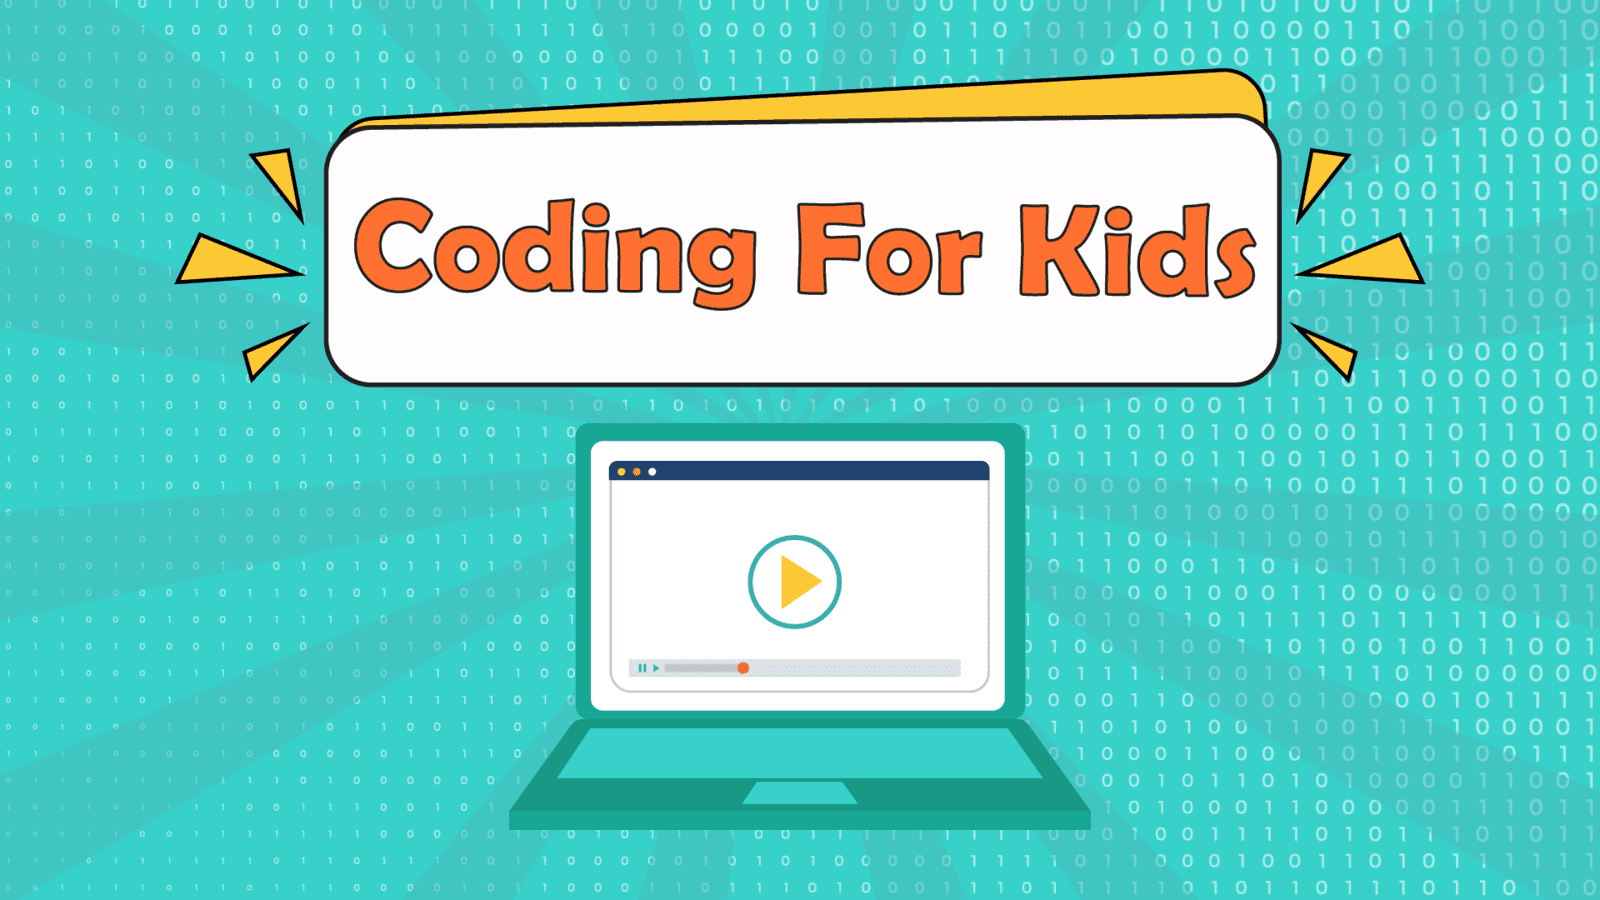 Coding for Kids: When benefits are beyond Coding